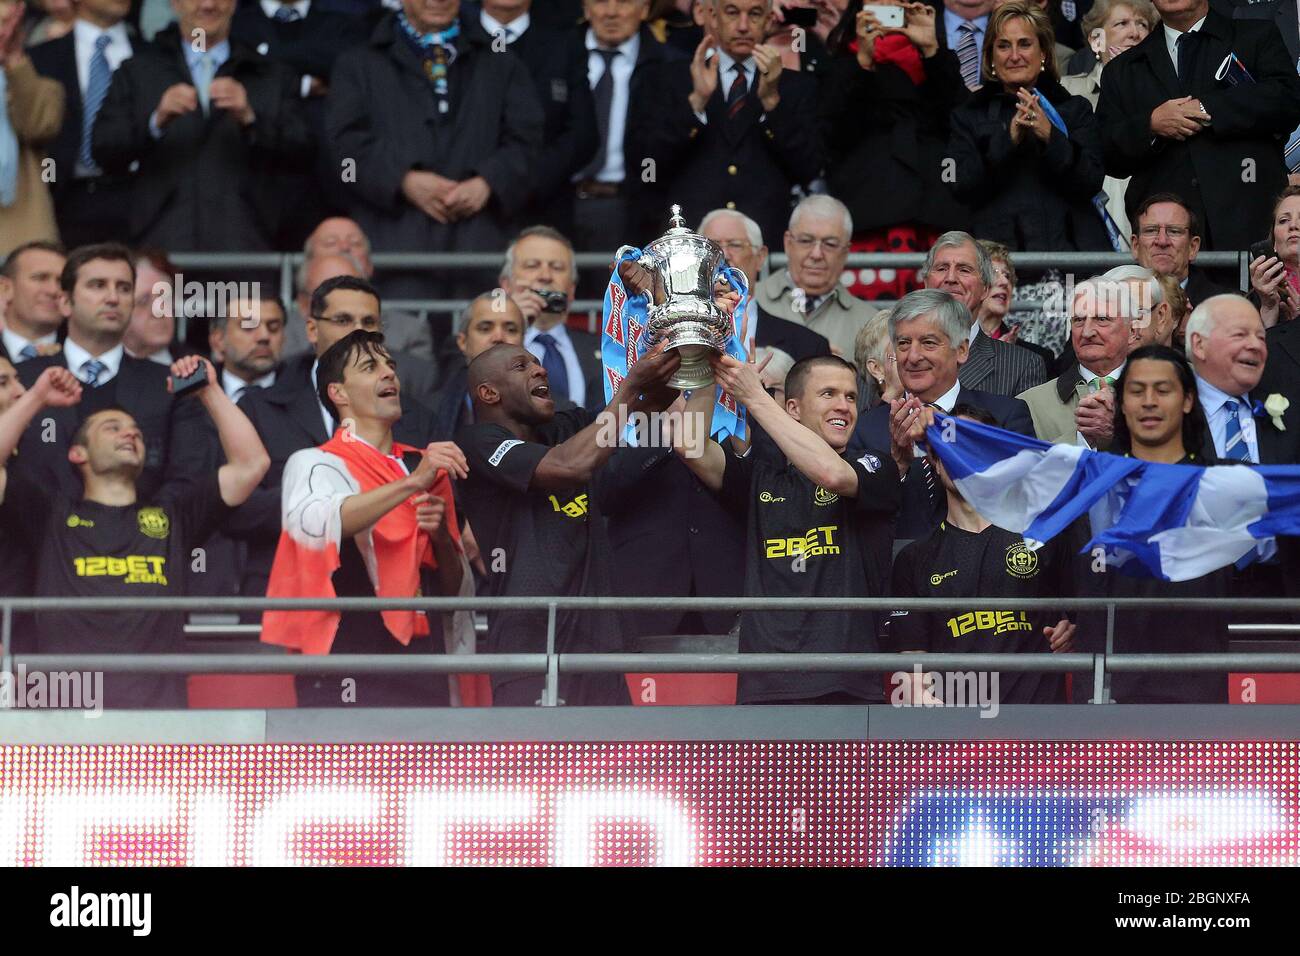 LONDON, ENGLAND Wigan Players lift the FA Cup and celebrate after Wigan's victory in The FA Cup With Budweiser Final match between Manchester City & Wigan Athletic at Wembley Stadium in London on Saturday May 11th 2013. (Credit: MI News) Stock Photo